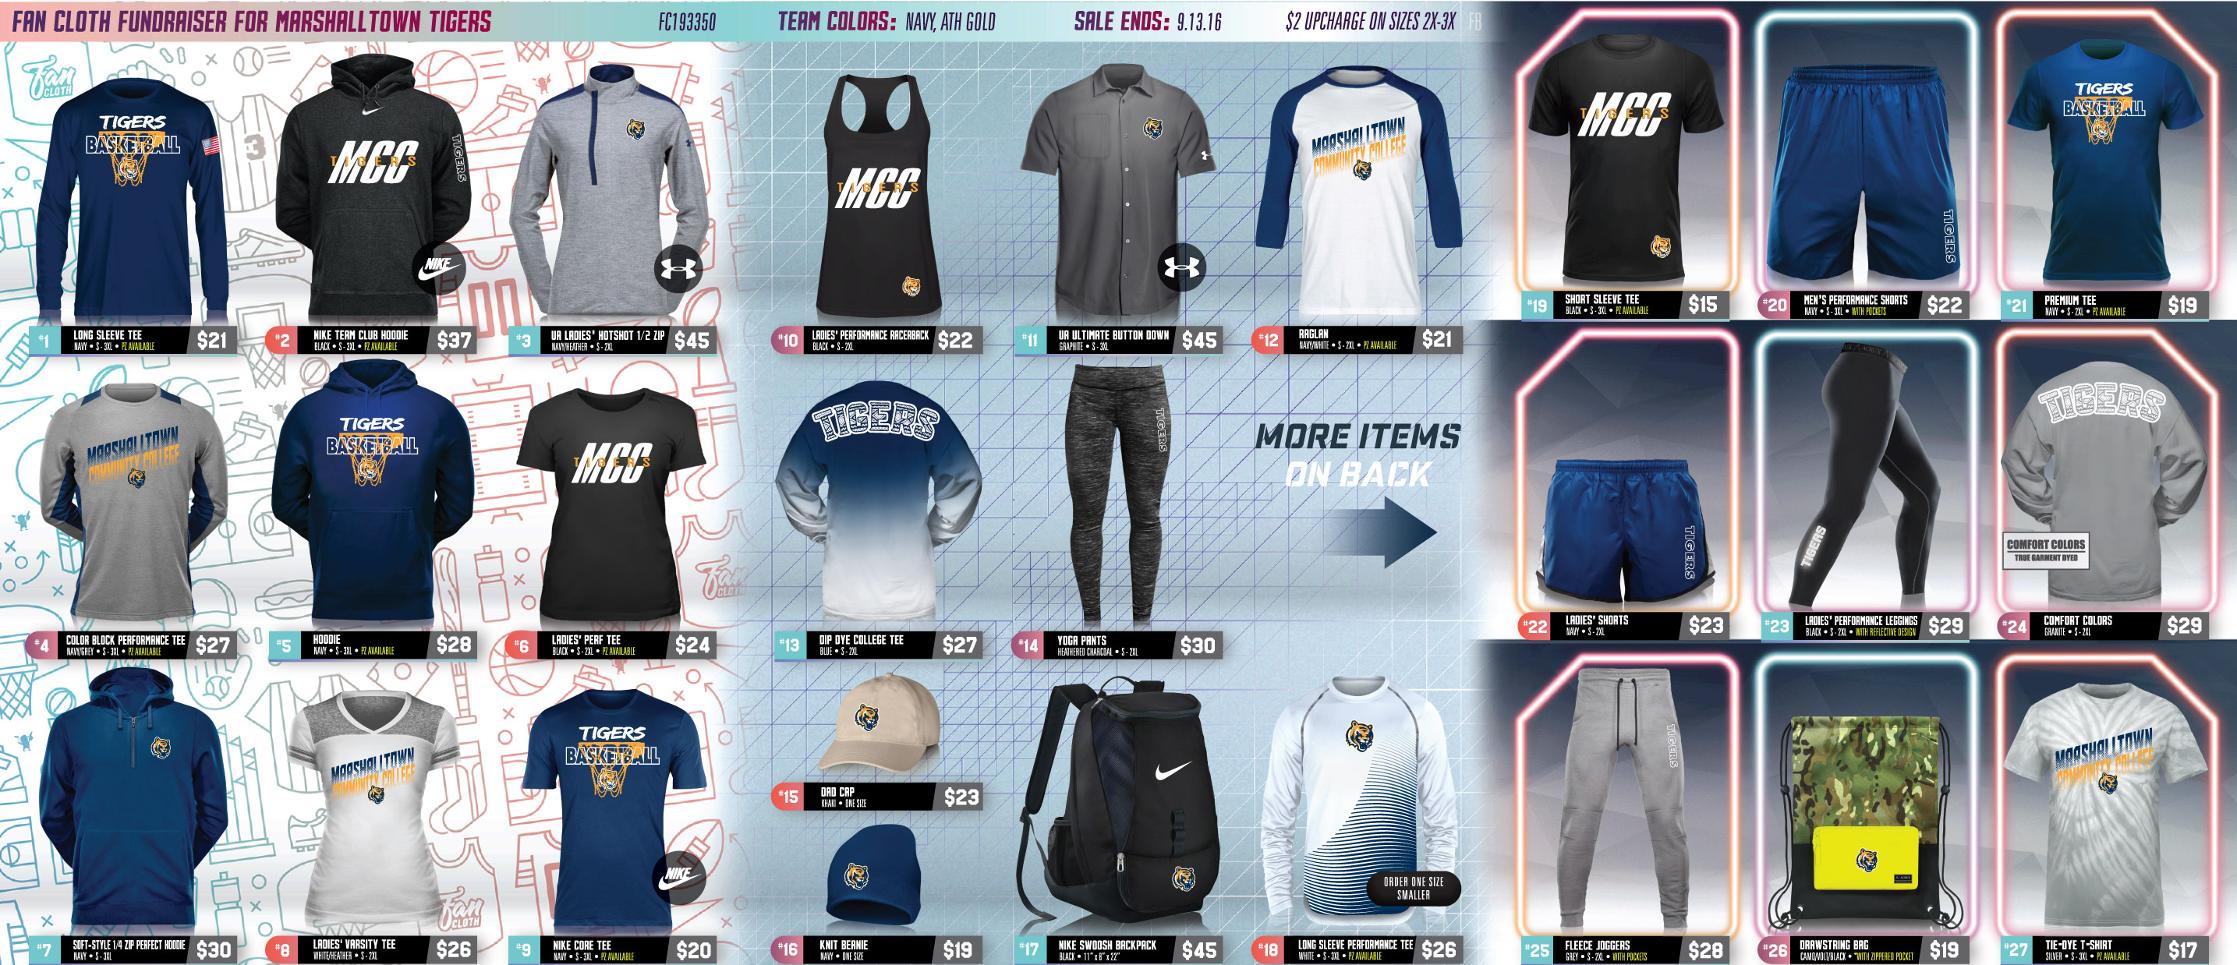 All apparel included in the image is available for sale